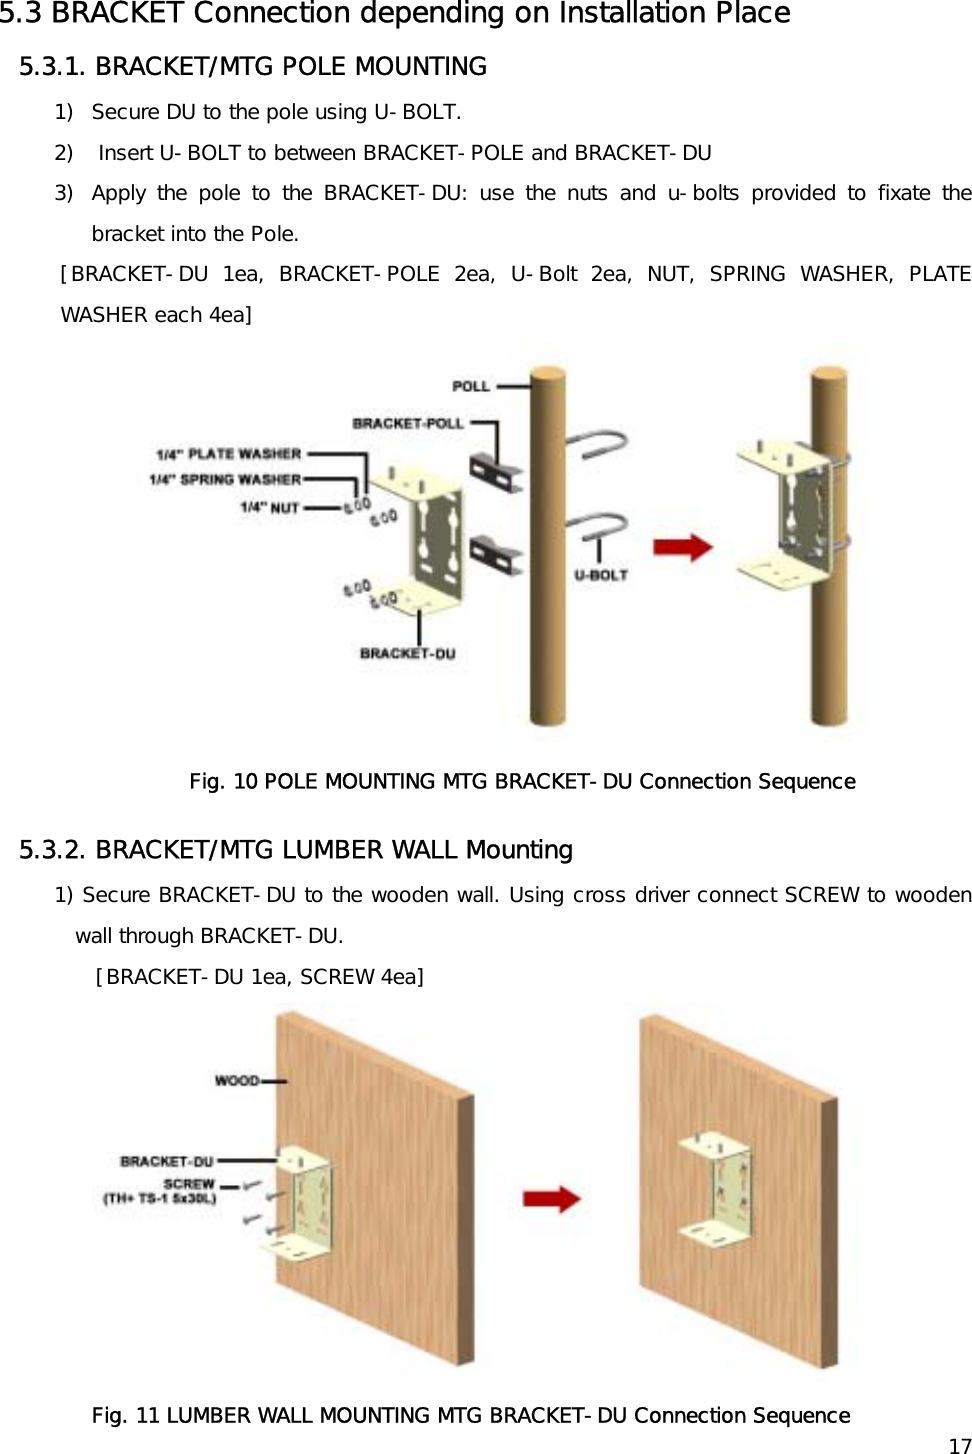    175.3 BRACKET Connection depending on Installation Place 5.3.1. BRACKET/MTG POLE MOUNTING  1)  Secure DU to the pole using U-BOLT.  2)   Insert U-BOLT to between BRACKET-POLE and BRACKET-DU  3)  Apply the pole to the BRACKET-DU: use the nuts and u-bolts provided to fixate the bracket into the Pole. [BRACKET-DU 1ea, BRACKET-POLE 2ea, U-Bolt 2ea, NUT, SPRING WASHER, PLATE WASHER each 4ea]  Fig. 10 POLE MOUNTING MTG BRACKET-DU Connection Sequence 5.3.2. BRACKET/MTG LUMBER WALL Mounting 1) Secure BRACKET-DU to the wooden wall. Using cross driver connect SCREW to wooden wall through BRACKET-DU. [BRACKET-DU 1ea, SCREW 4ea]  Fig. 11 LUMBER WALL MOUNTING MTG BRACKET-DU Connection Sequence 